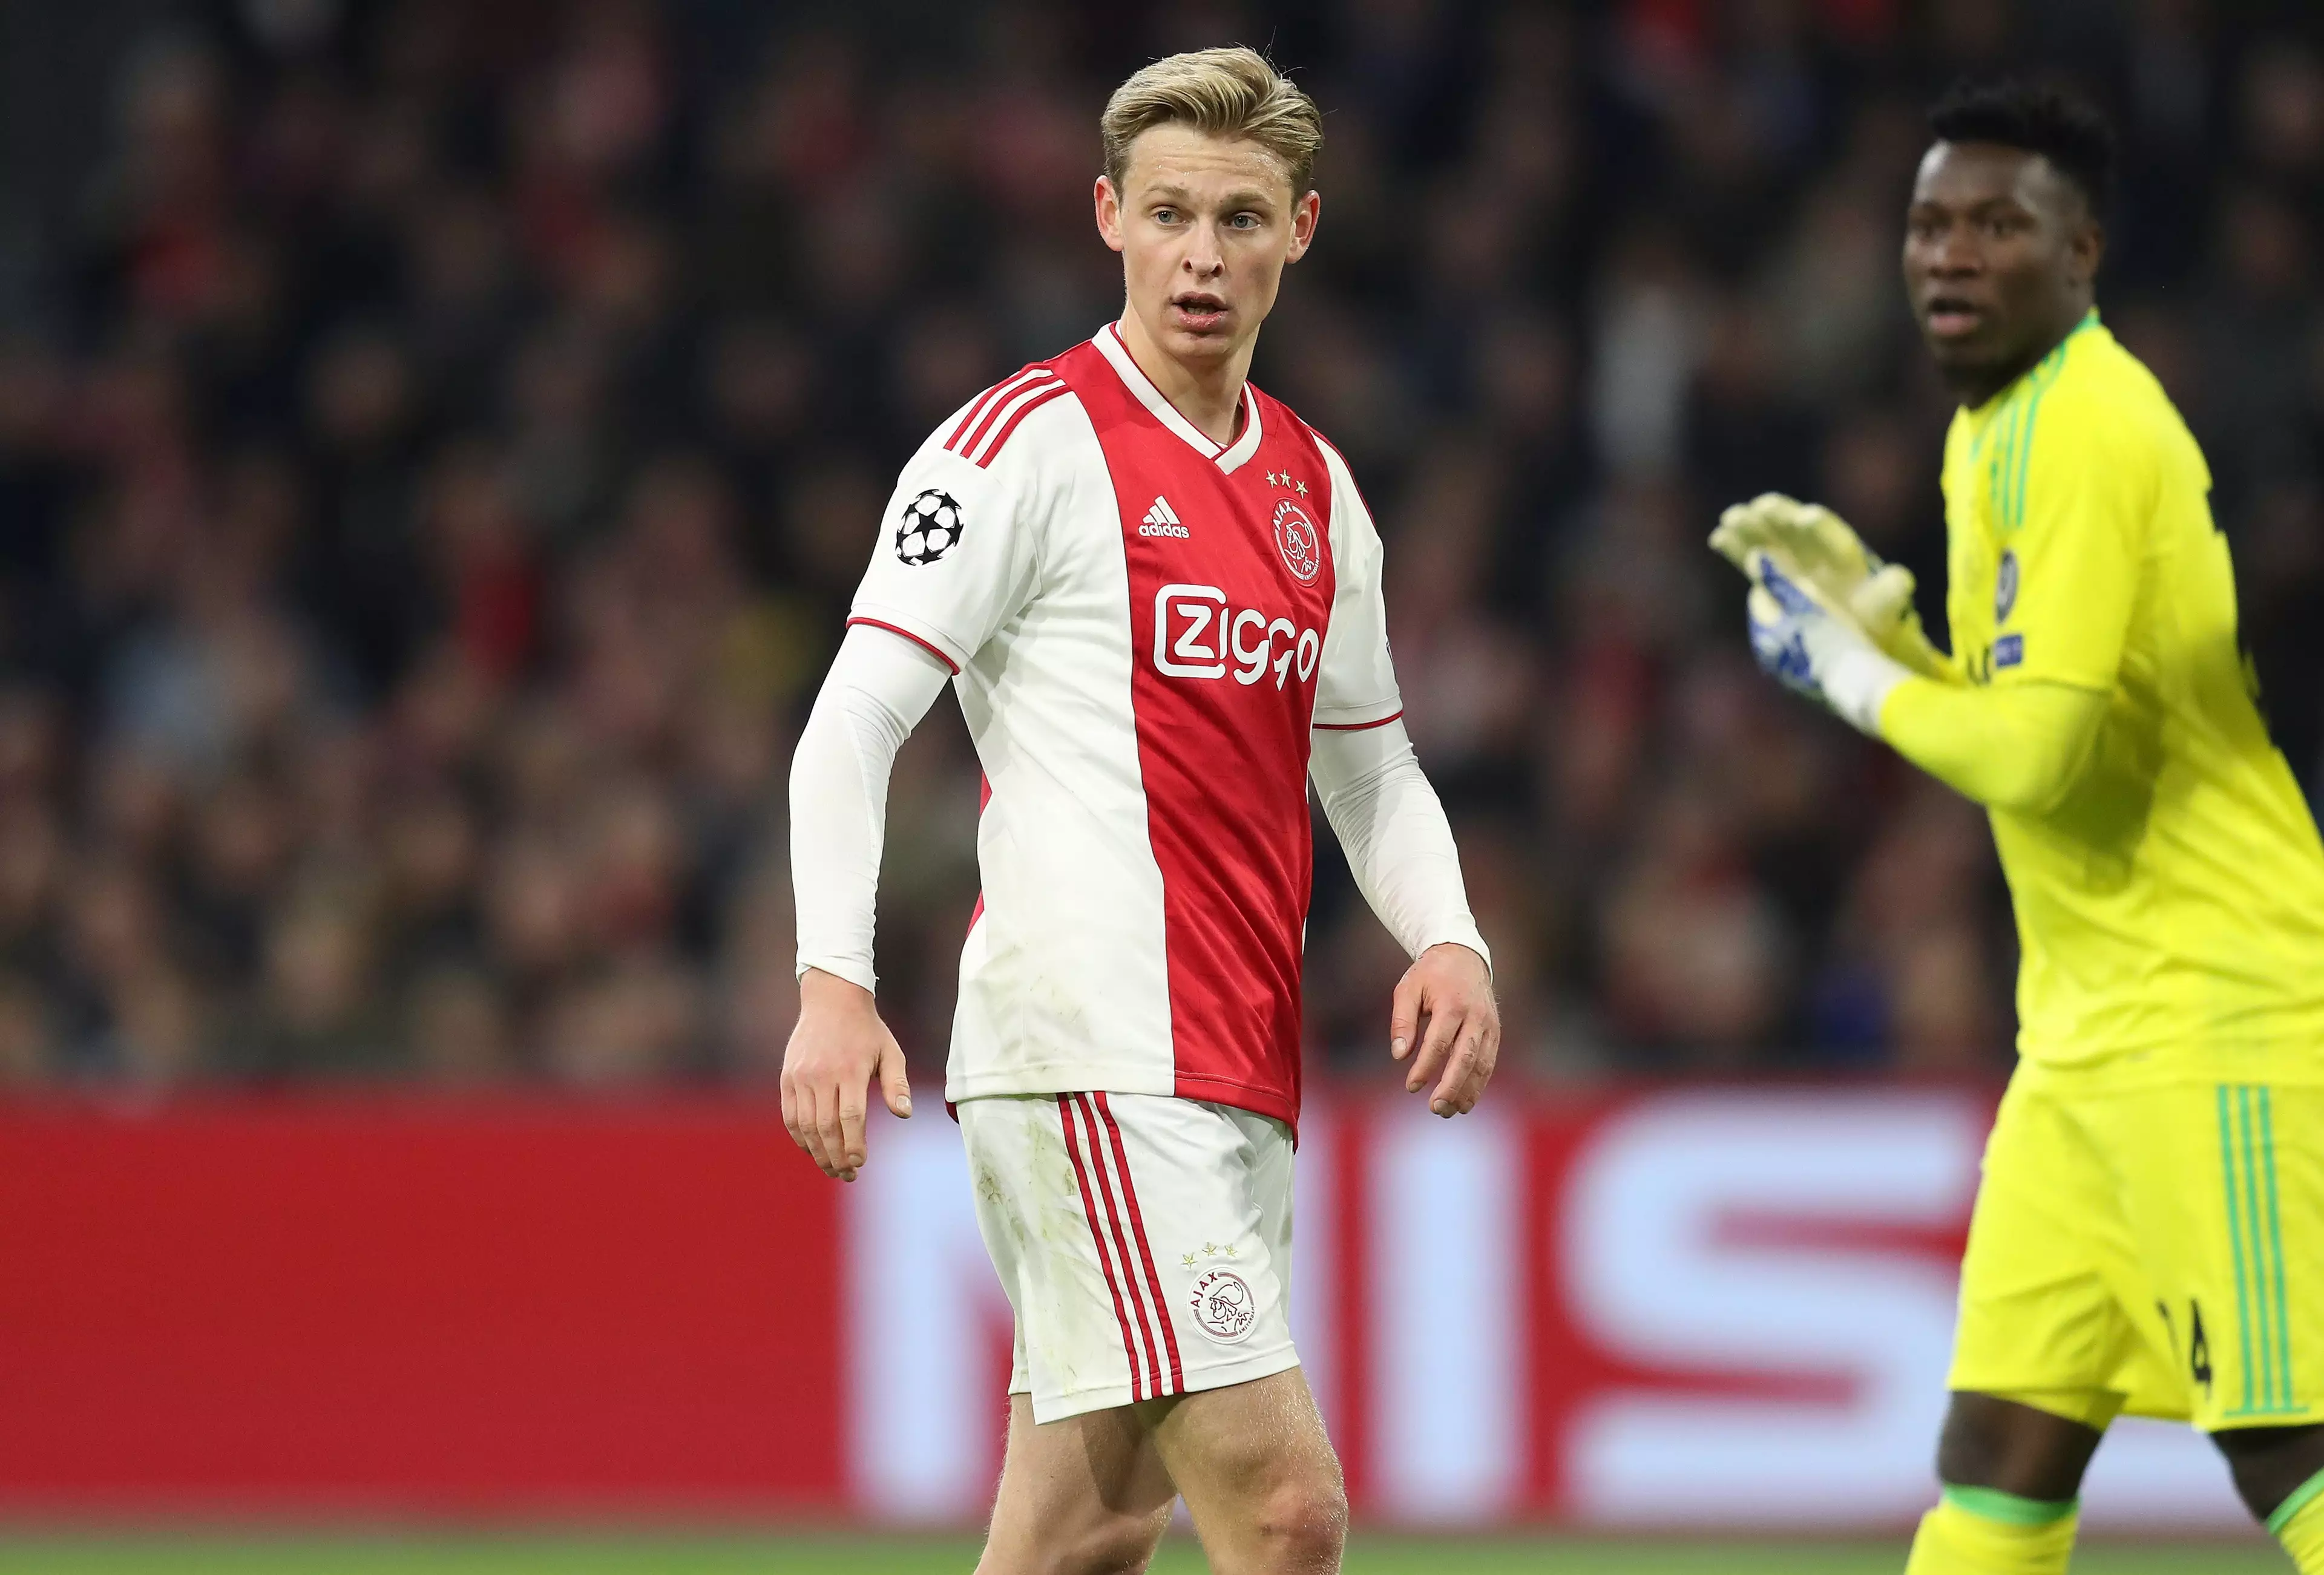 De Jong's breakout season for Ajax earned him a move to Barcelona and a place in the top 10. Image: PA Images